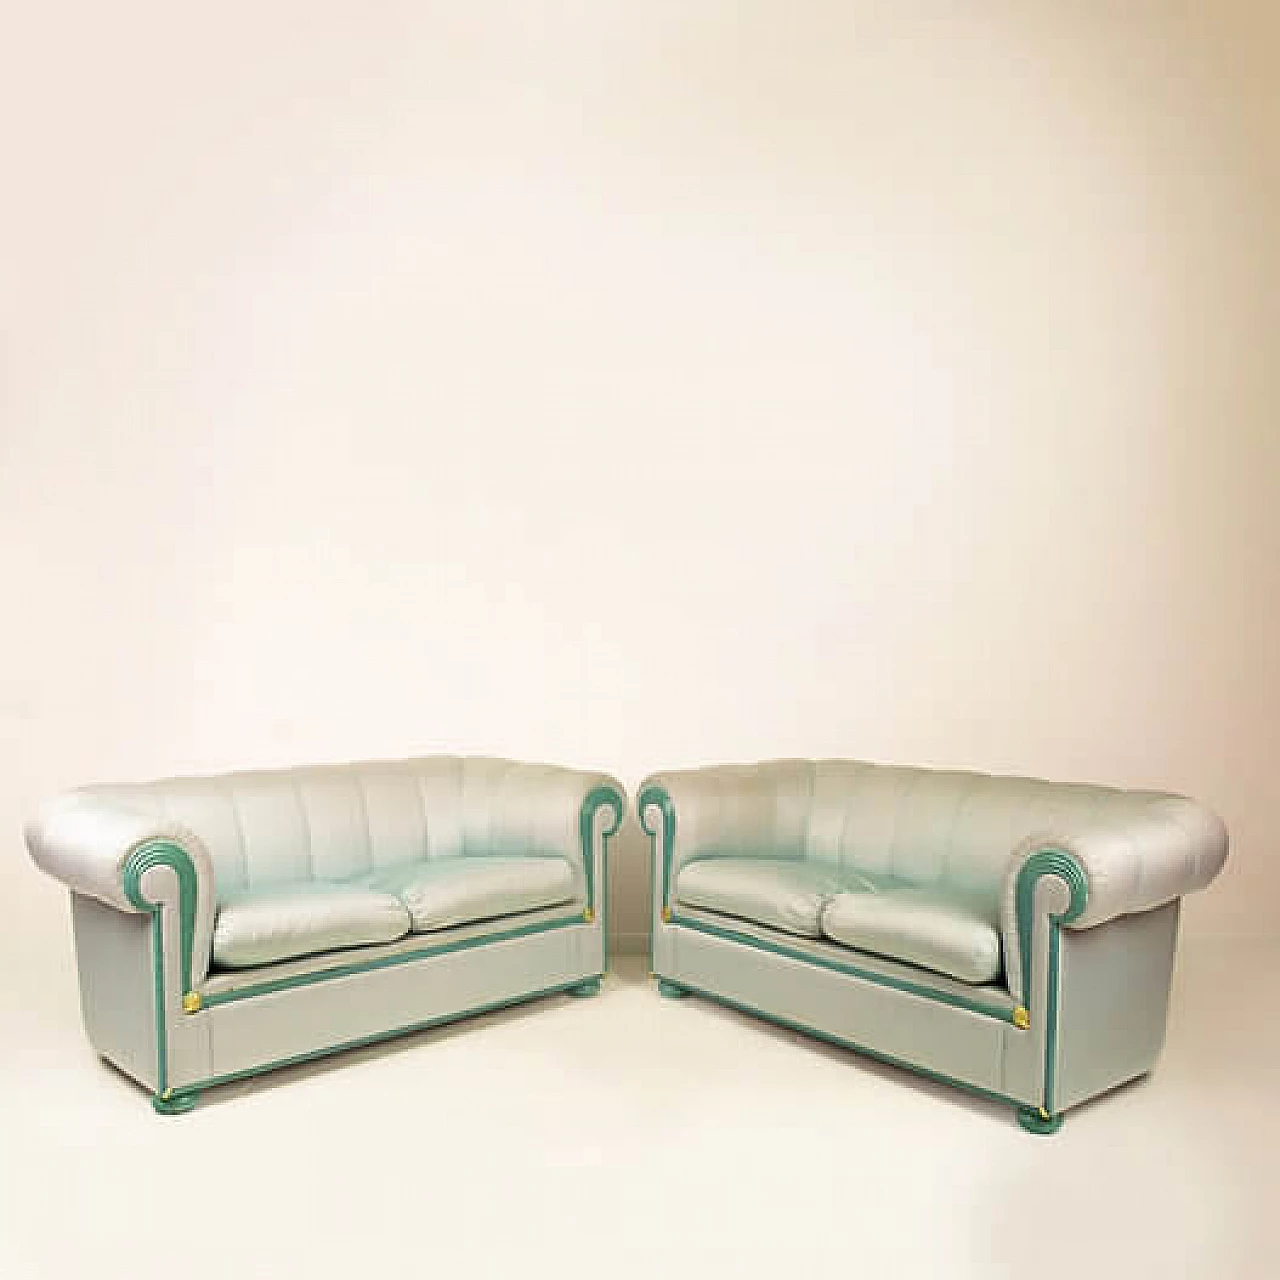 Pair of sofas in marbled wood and Moirè silk by Fabrizio Smania for Smania Studio Interni, 1980s 4